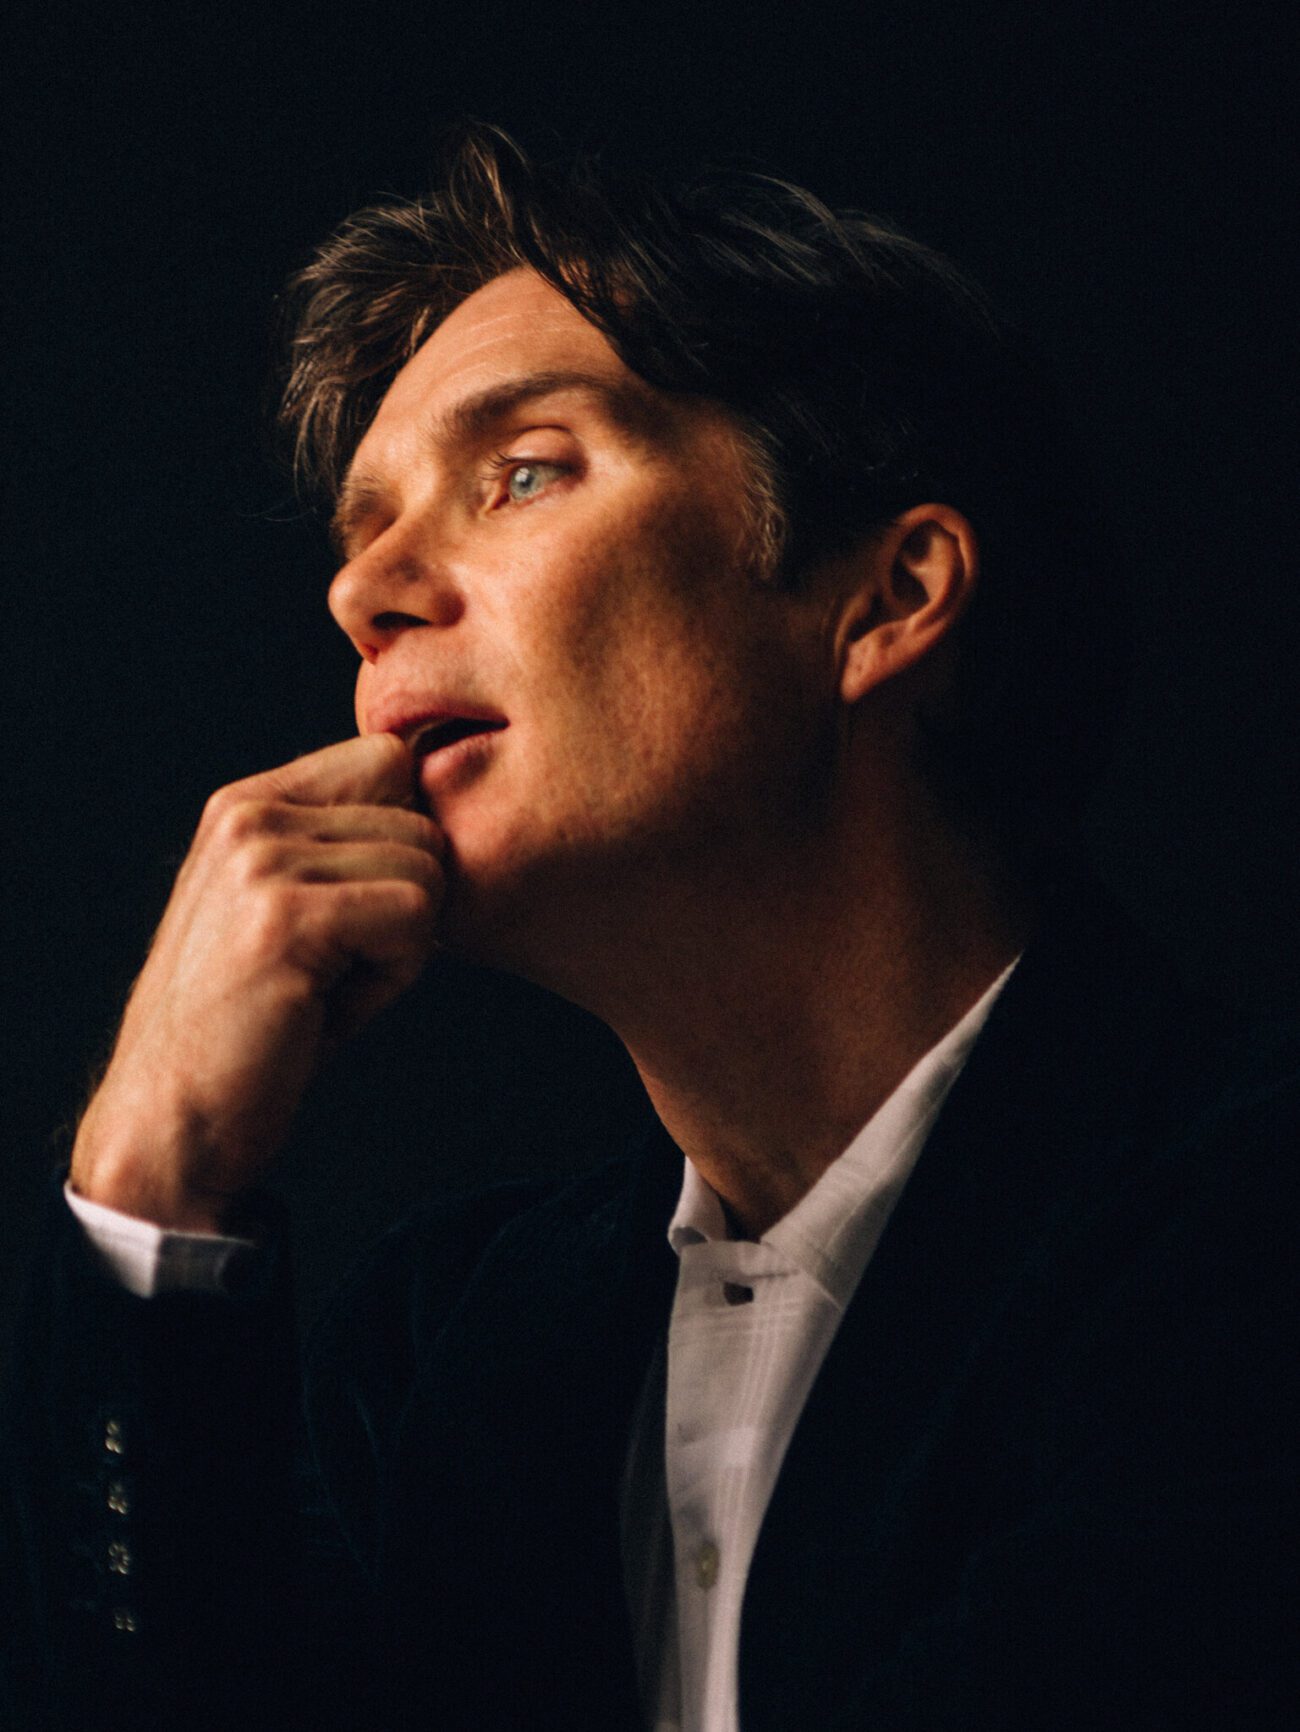 Cillian’s speech and his view on the country he grew up in should be encouraged and recognized more in Hollywood.